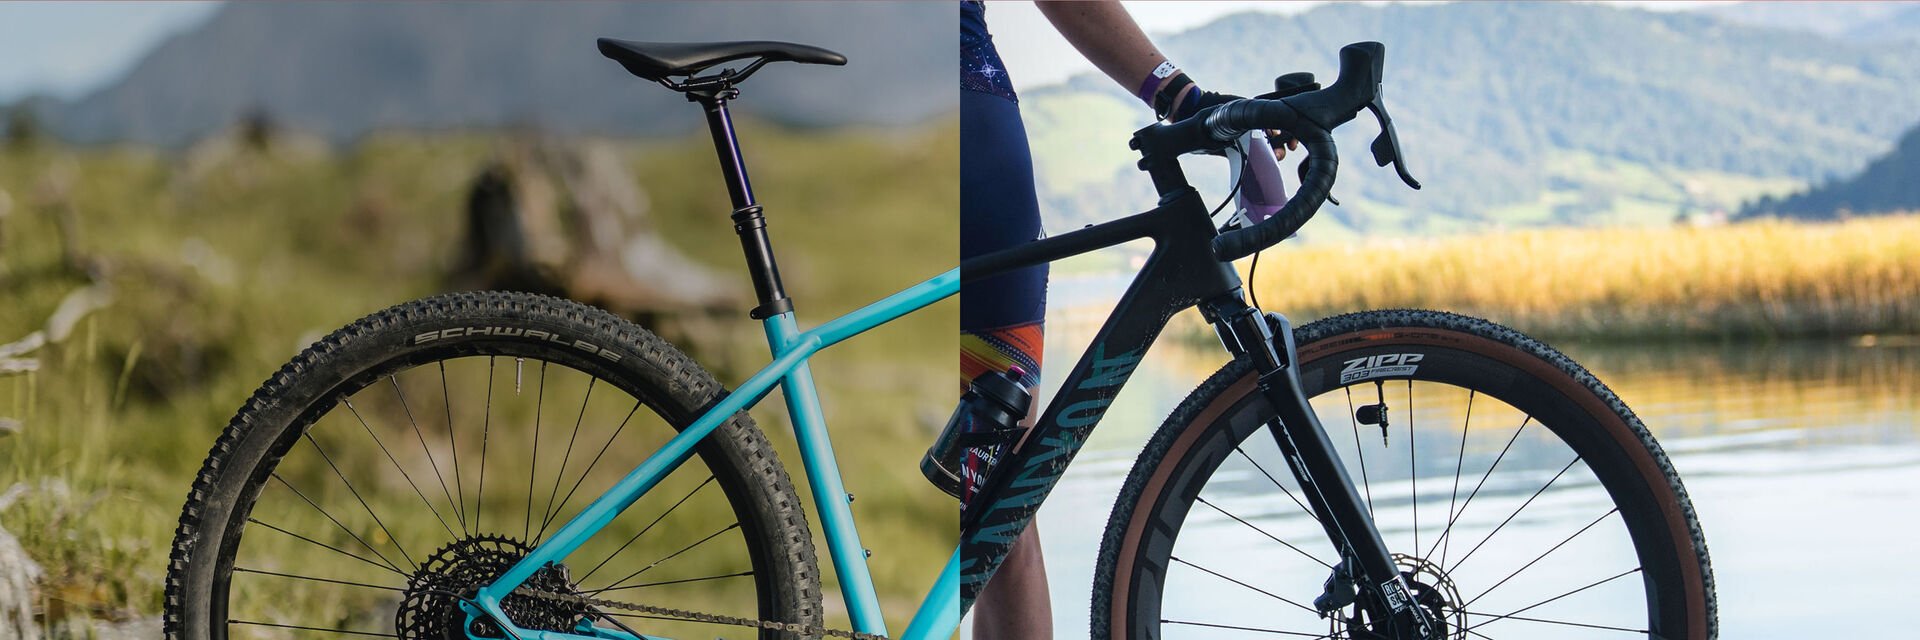 The best bikes at an even better price